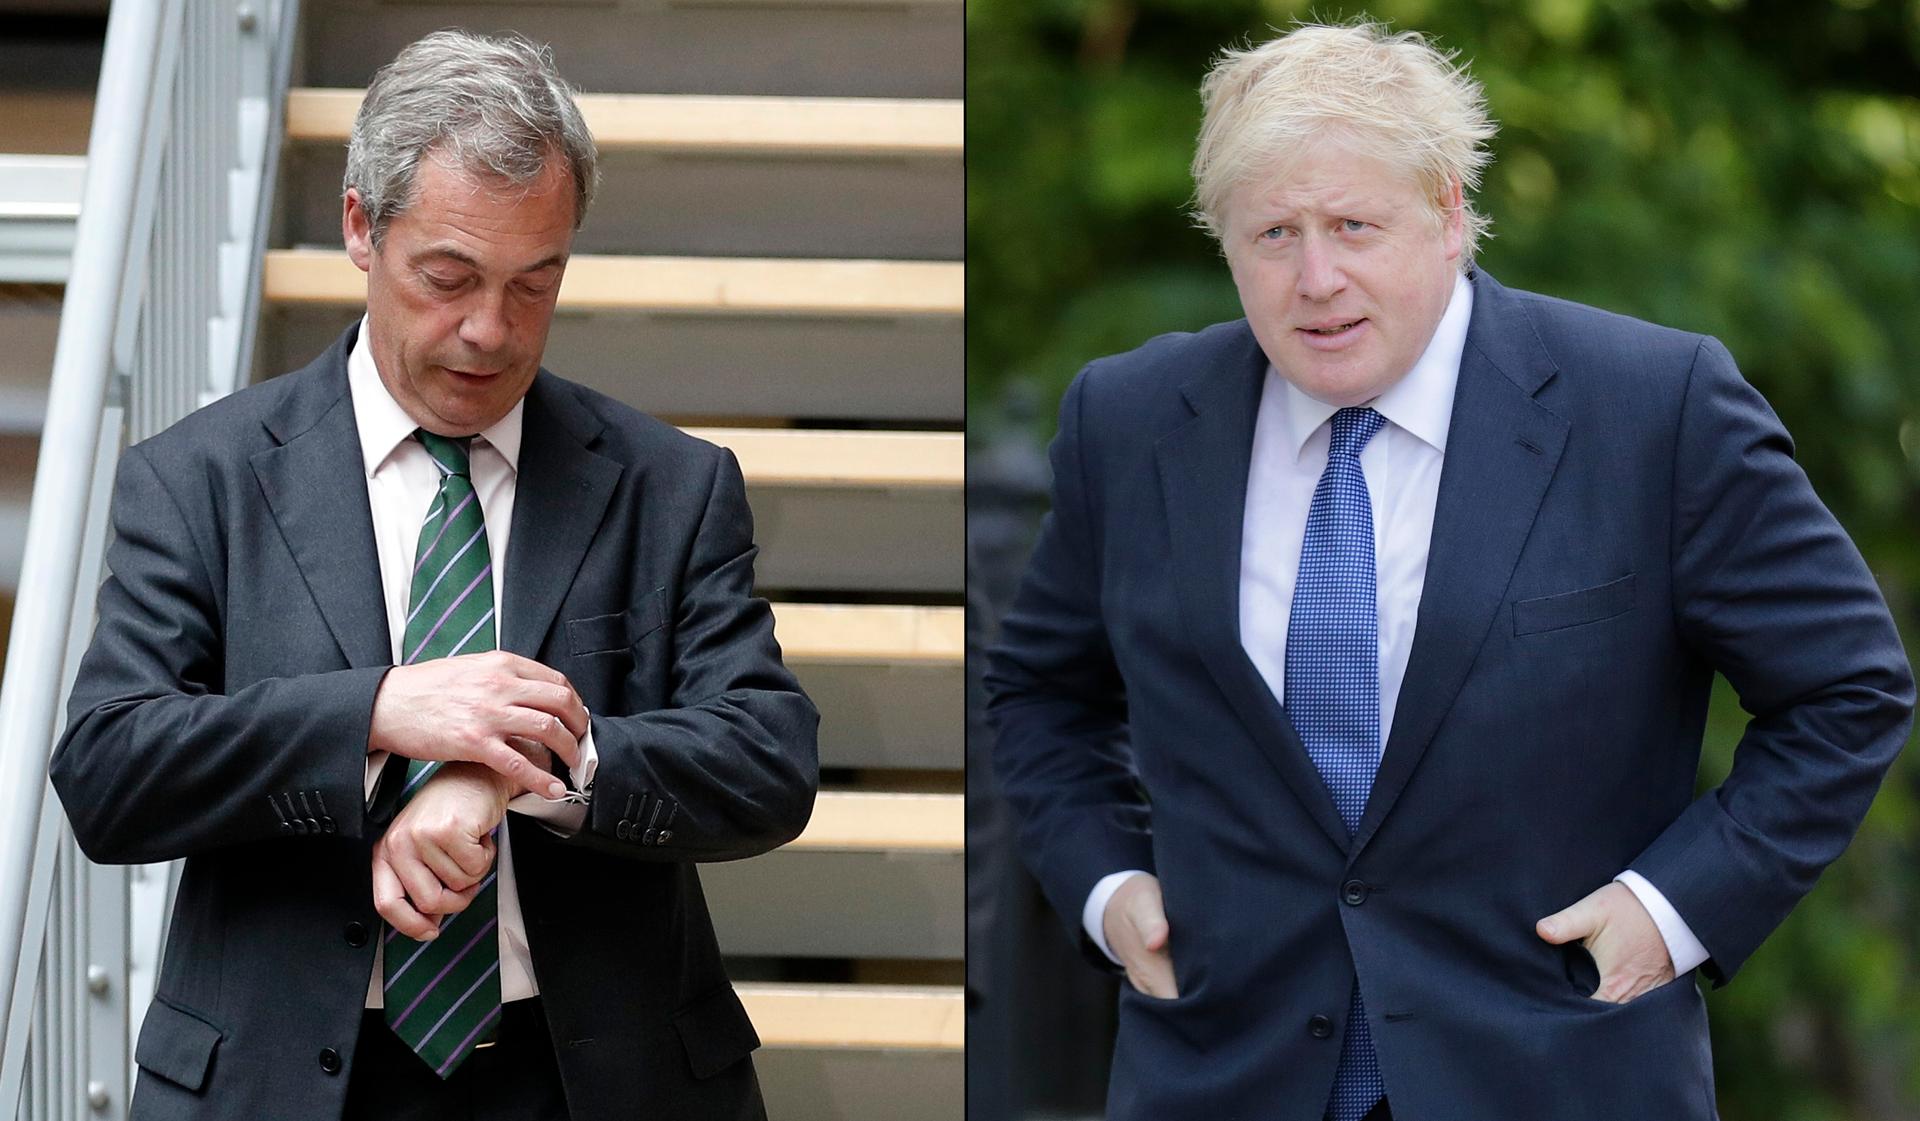 Nigel Farage (left) checks his watch during the first EU Summit in Brussels after the Brexit vote. Boris Johnson (right) leave his home in London. June 28, 2016. 